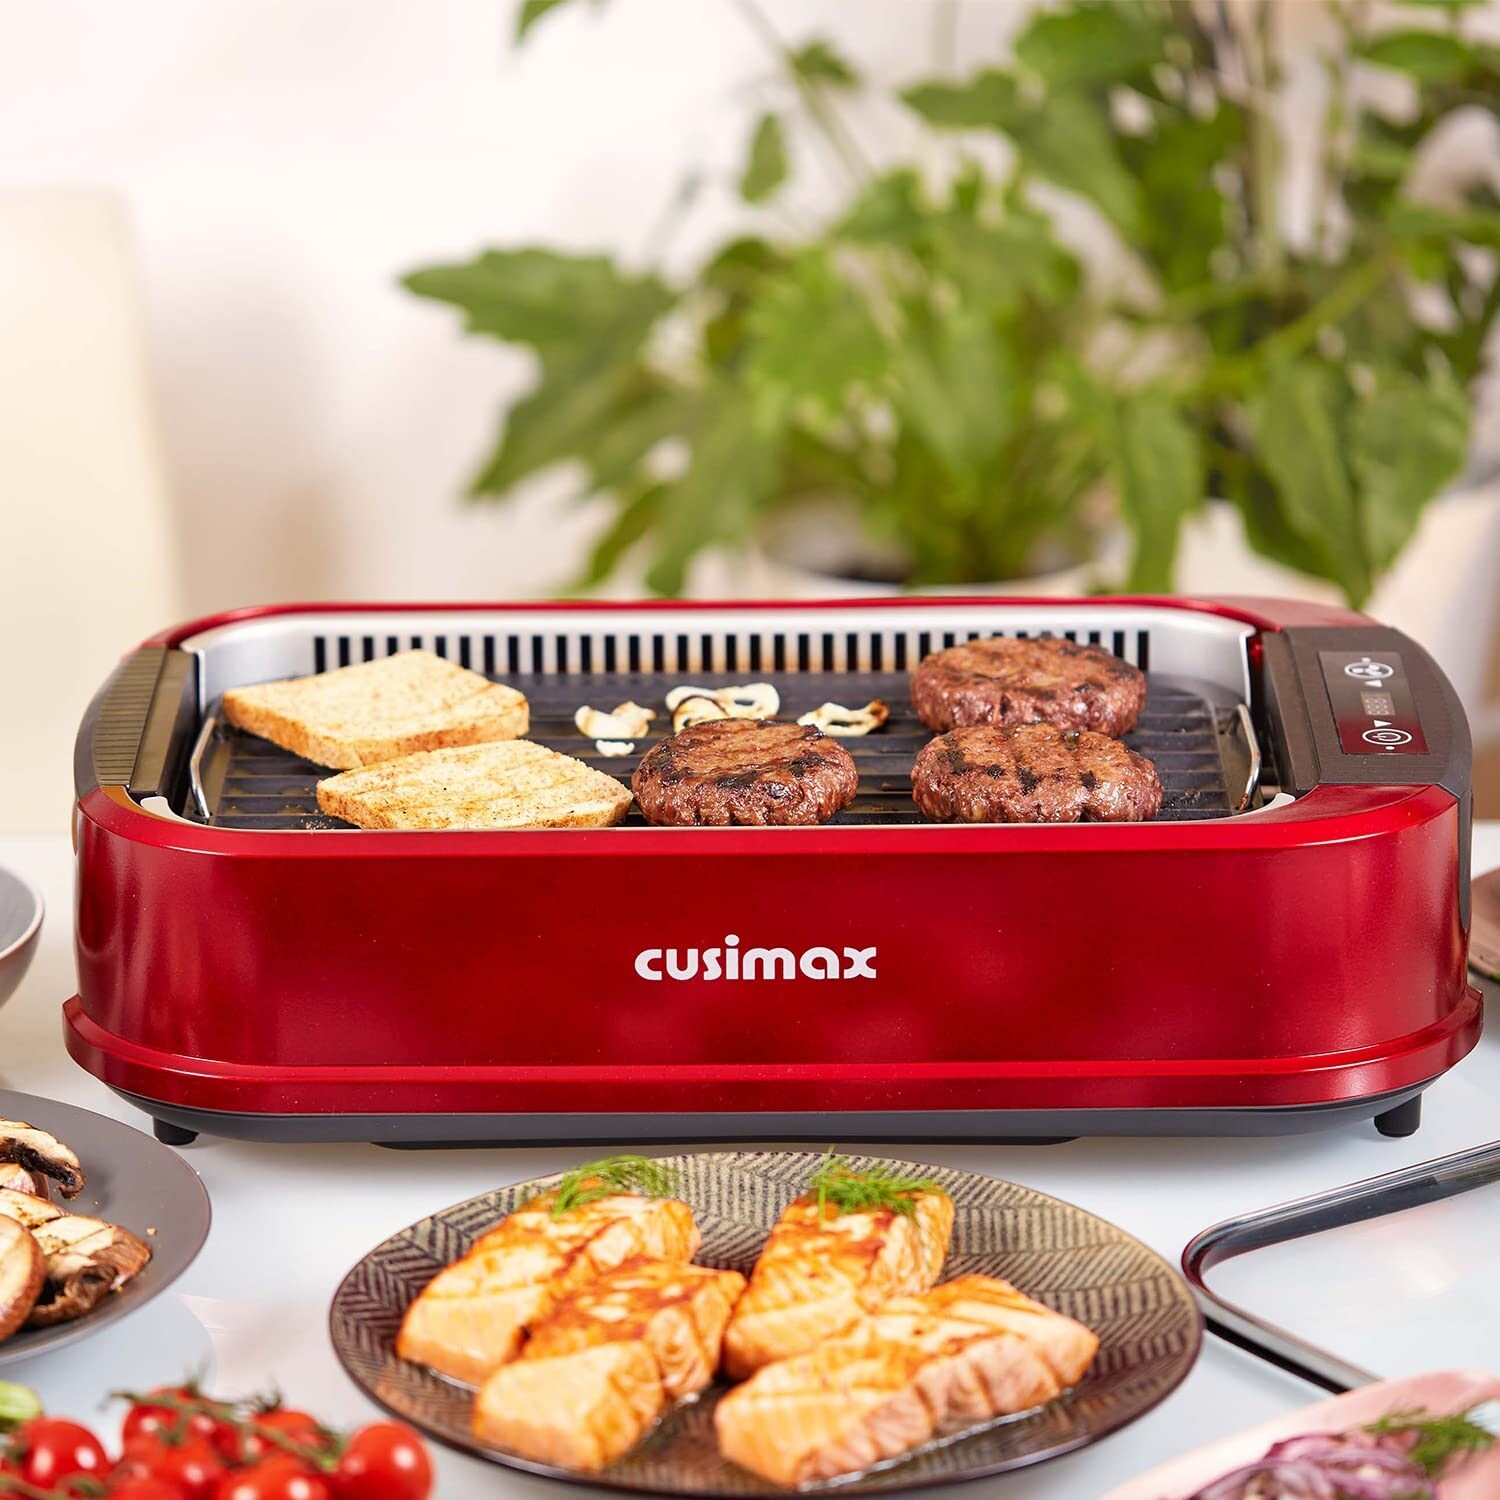 https://ak1.ostkcdn.com/images/products/is/images/direct/5556256f818023dd39d4e4829f3dc5c309ea560f/Smokeless-Grill-Indoor%2C-Electric-Grill-Griddle%2C-1500W-Korean-BBQ-Grill-with-LED-Smart-Display-%26-Tempered-Glass-Lid.jpg